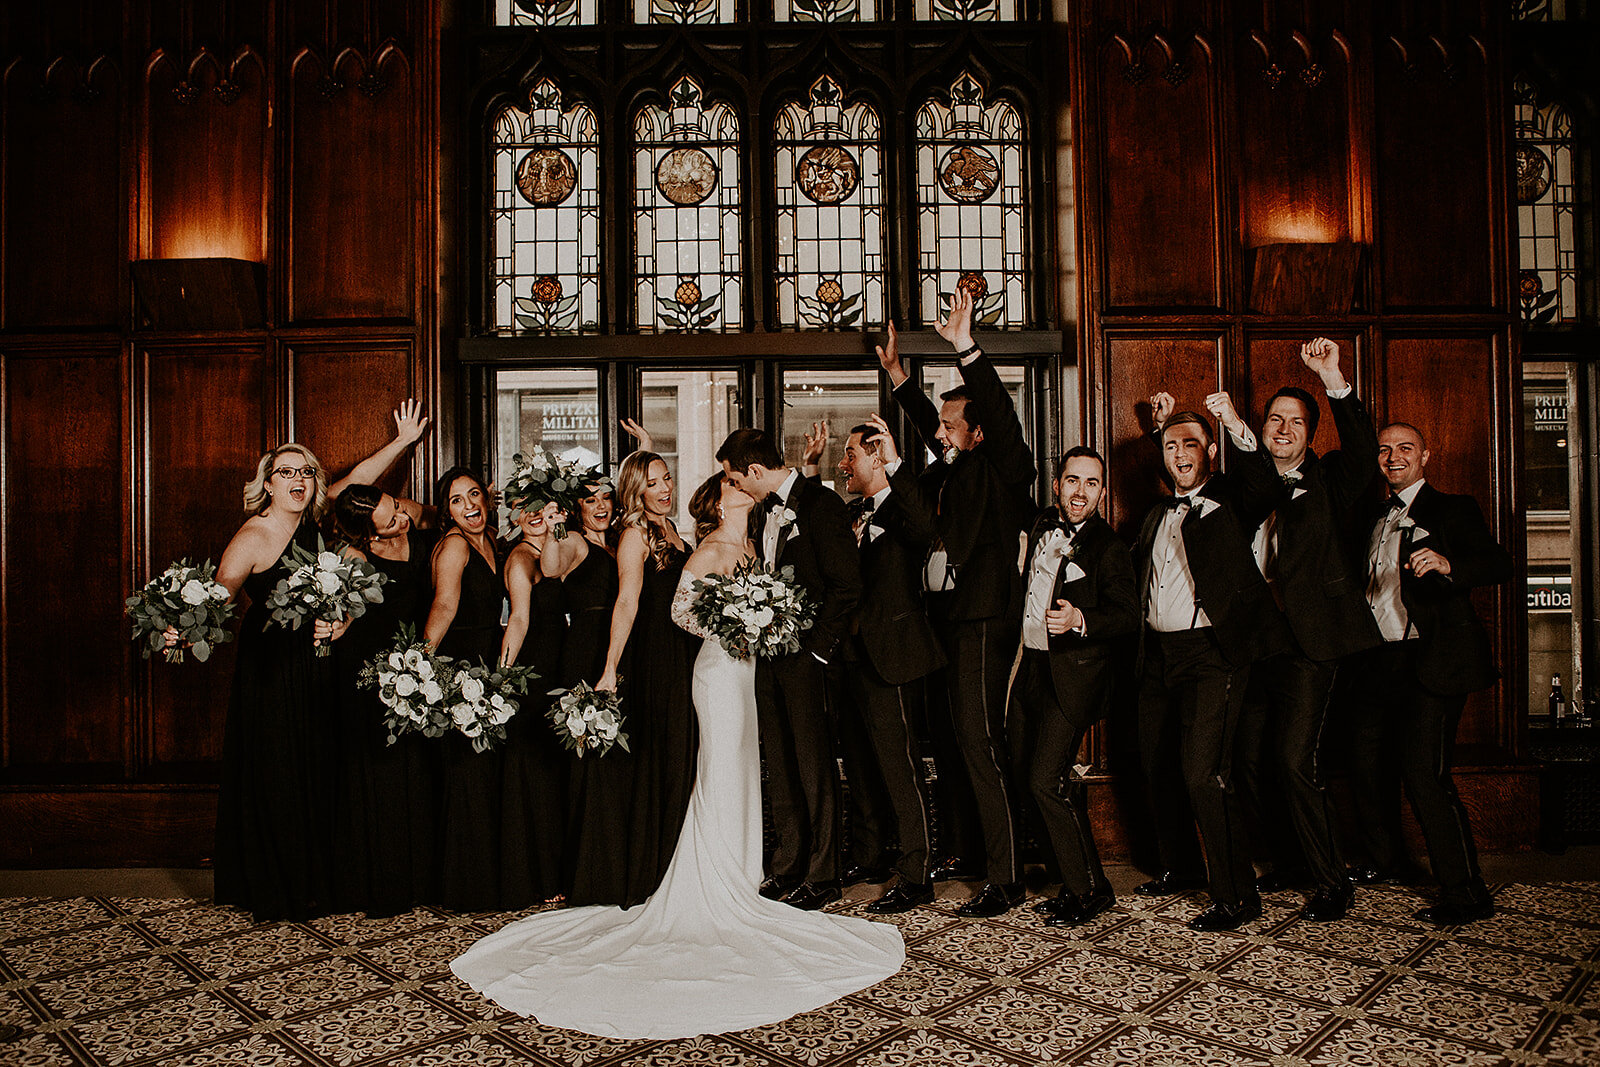 Dreamy Winter Wedding at University Club Chicago by The Simply Elegant Group featured on CHI thee WED